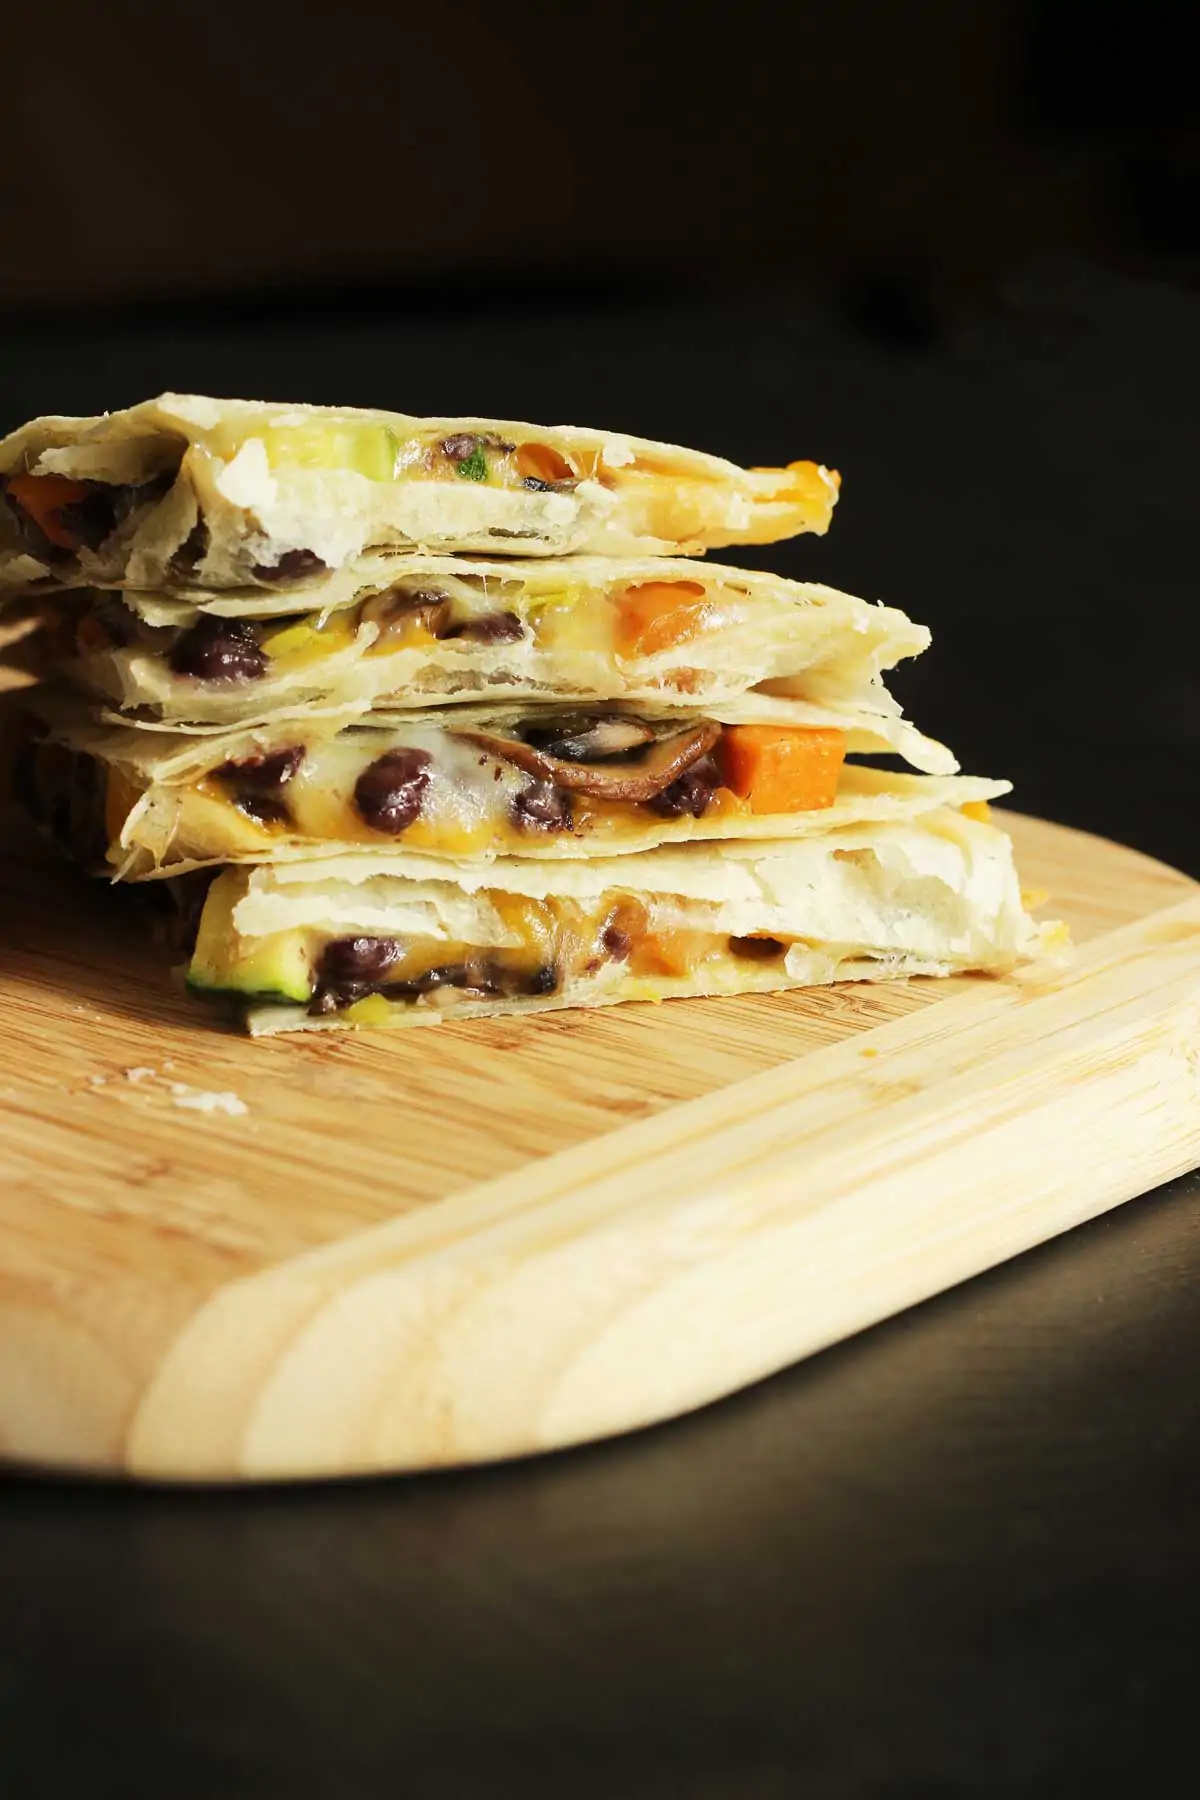 quarters of quesadilla stacked on wooden cutting board.